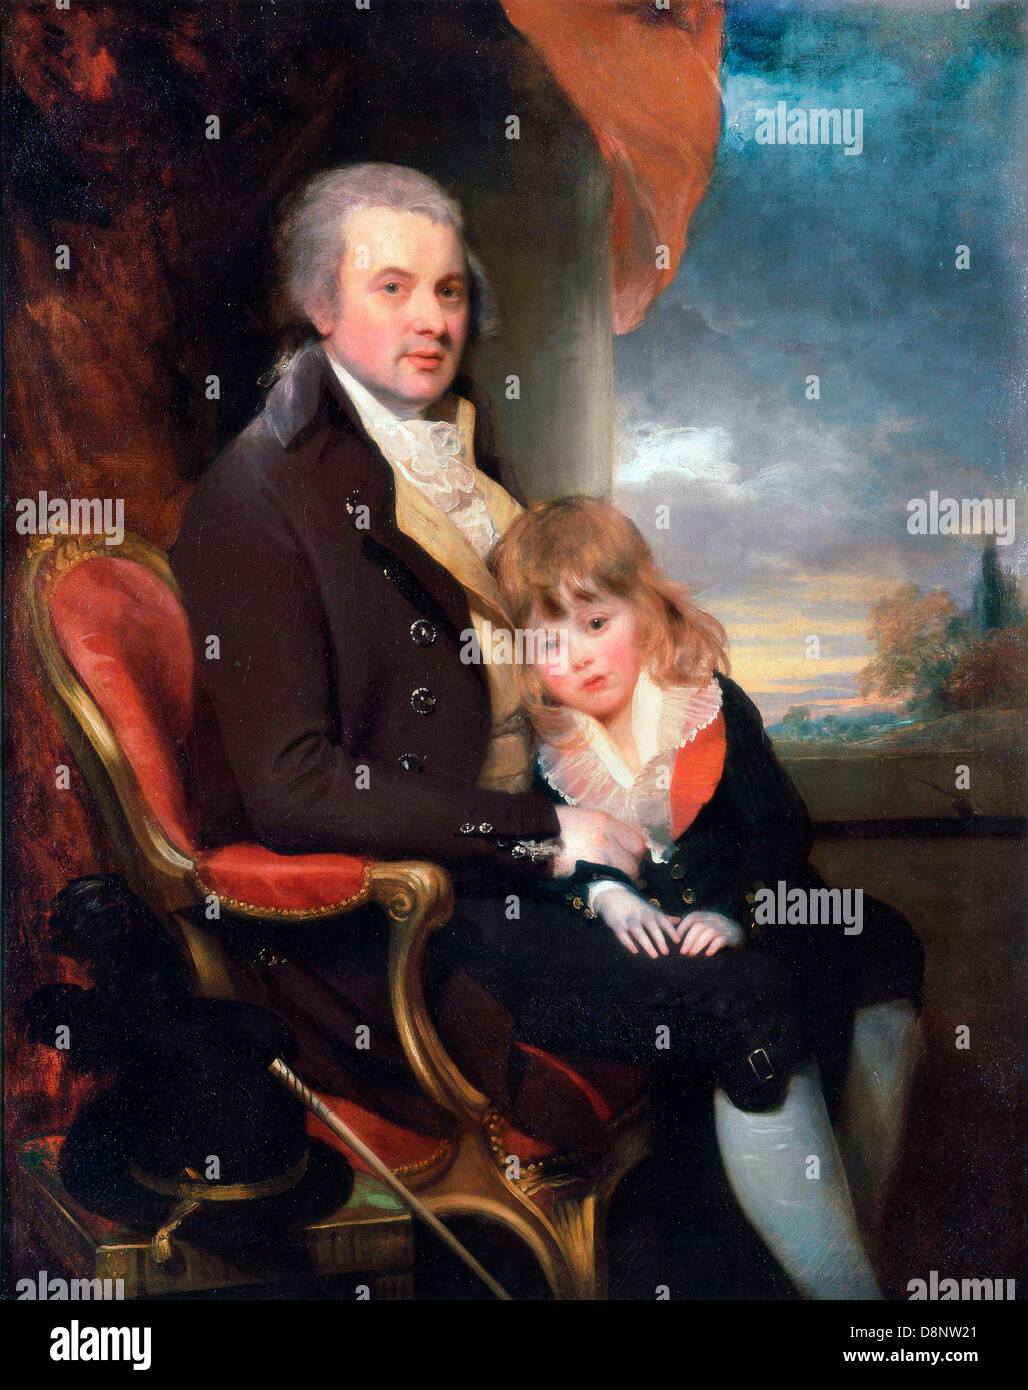 Sir William Beechey, Edward George Lind and His Son, Montague. Circa 1800. Oil on canvas. Yale Center for British Art, New Haven Stock Photo